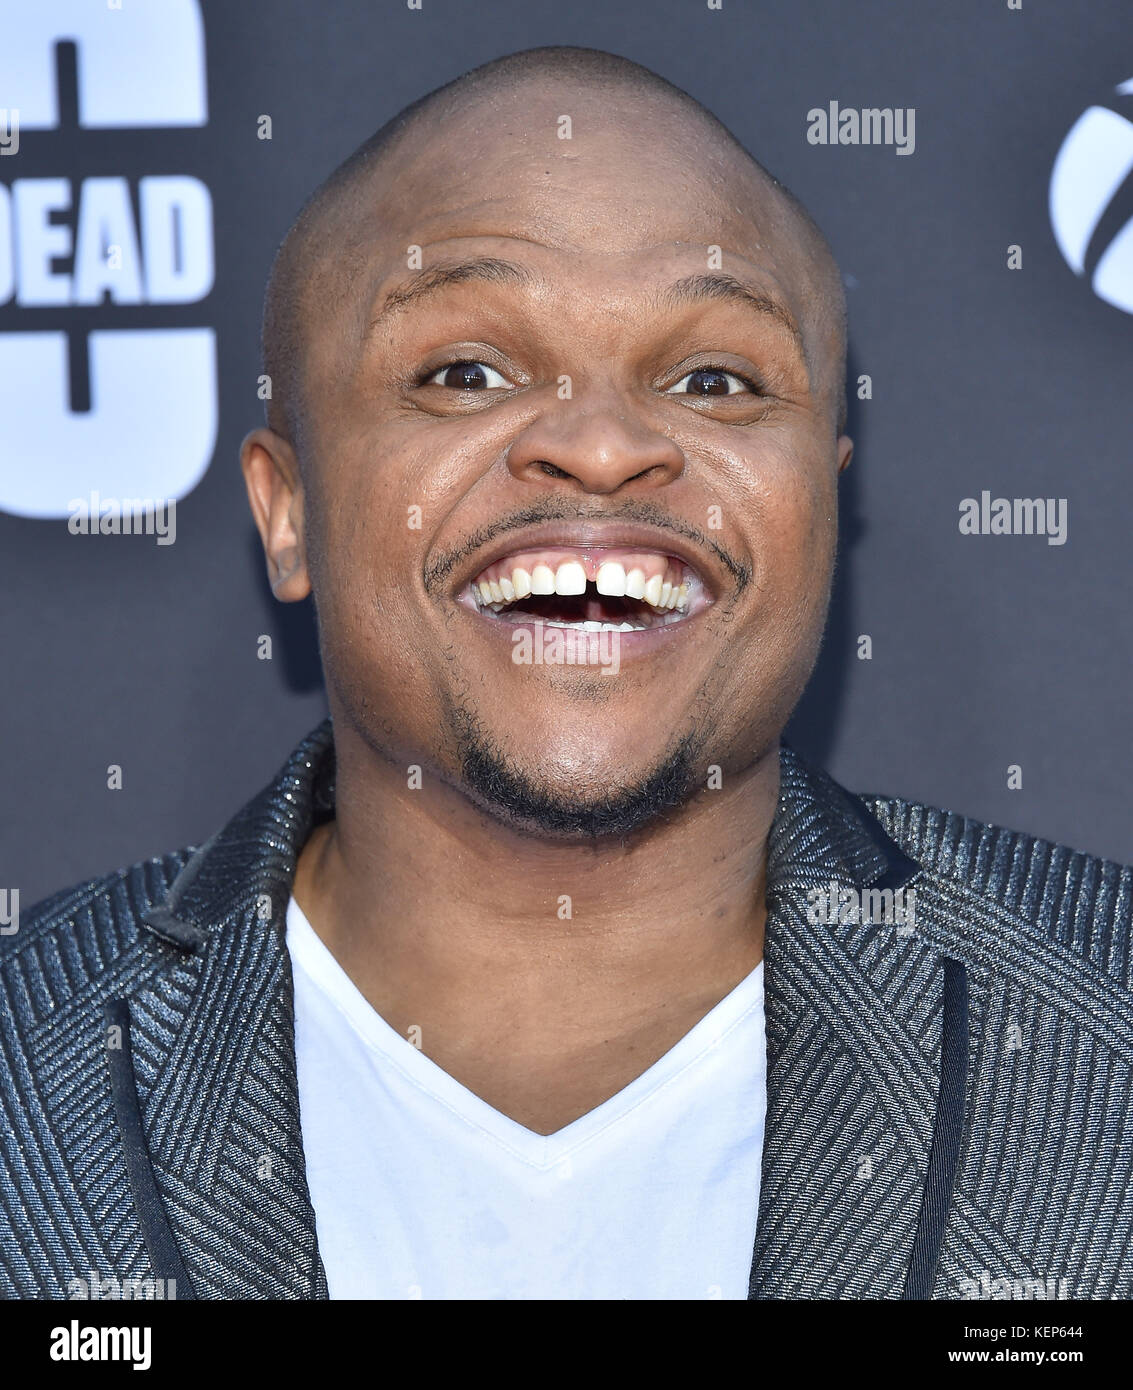 Hollywood, California, USA. 22nd Oct, 2017. IronE Singleton arrives for the premiere of AMC's 'The Walking Dead' Season 8 at The Greek theater. Credit: Lisa O'Connor/ZUMA Wire/Alamy Live News Stock Photo